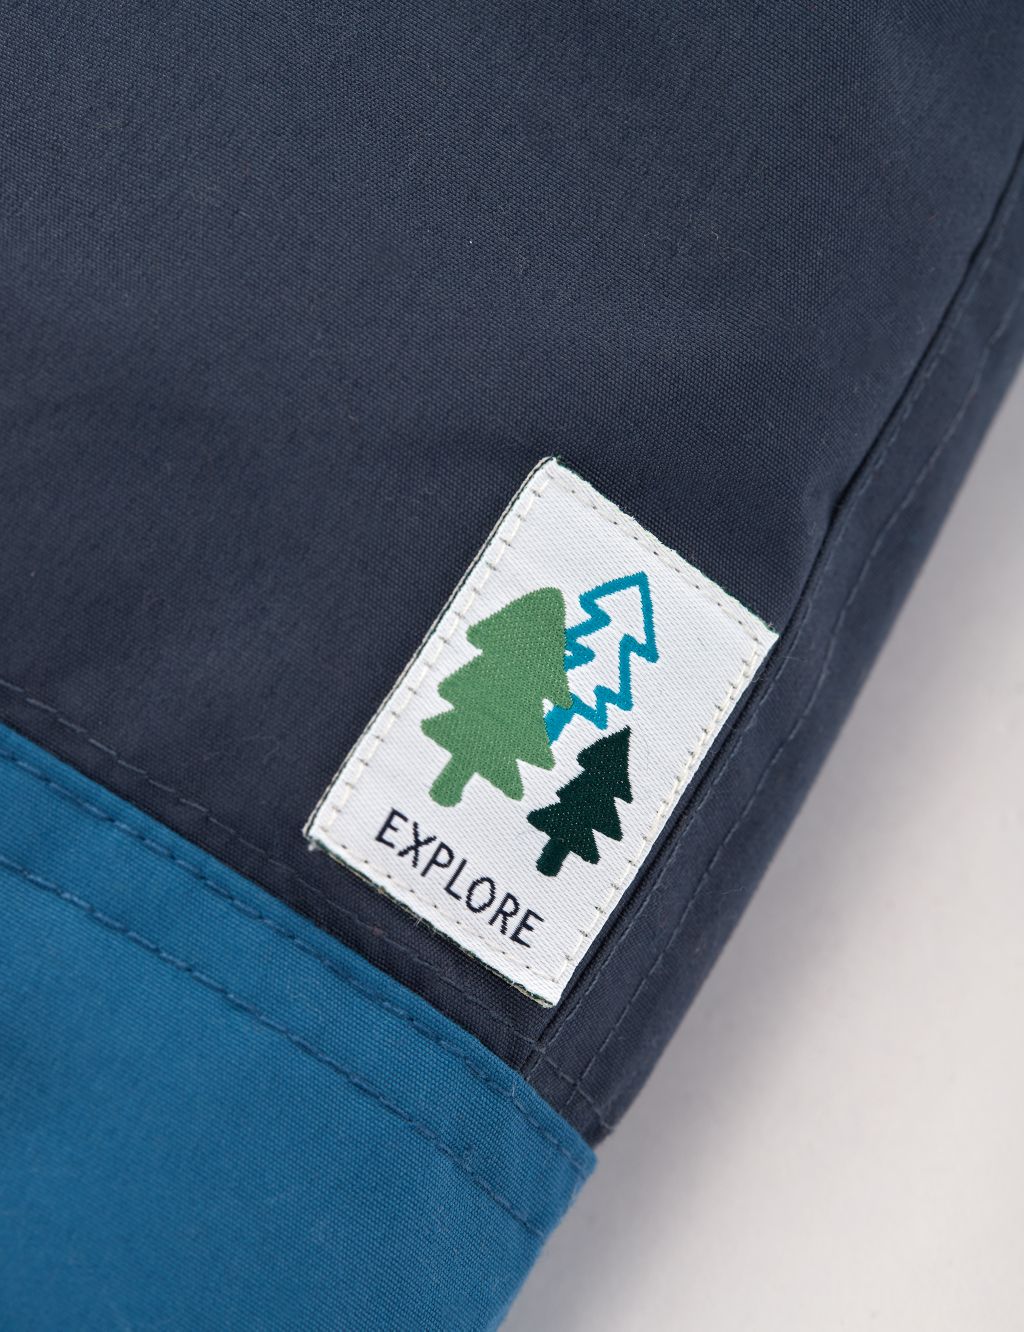 Expedition Trousers (18 Mths - 10 Yrs) image 3